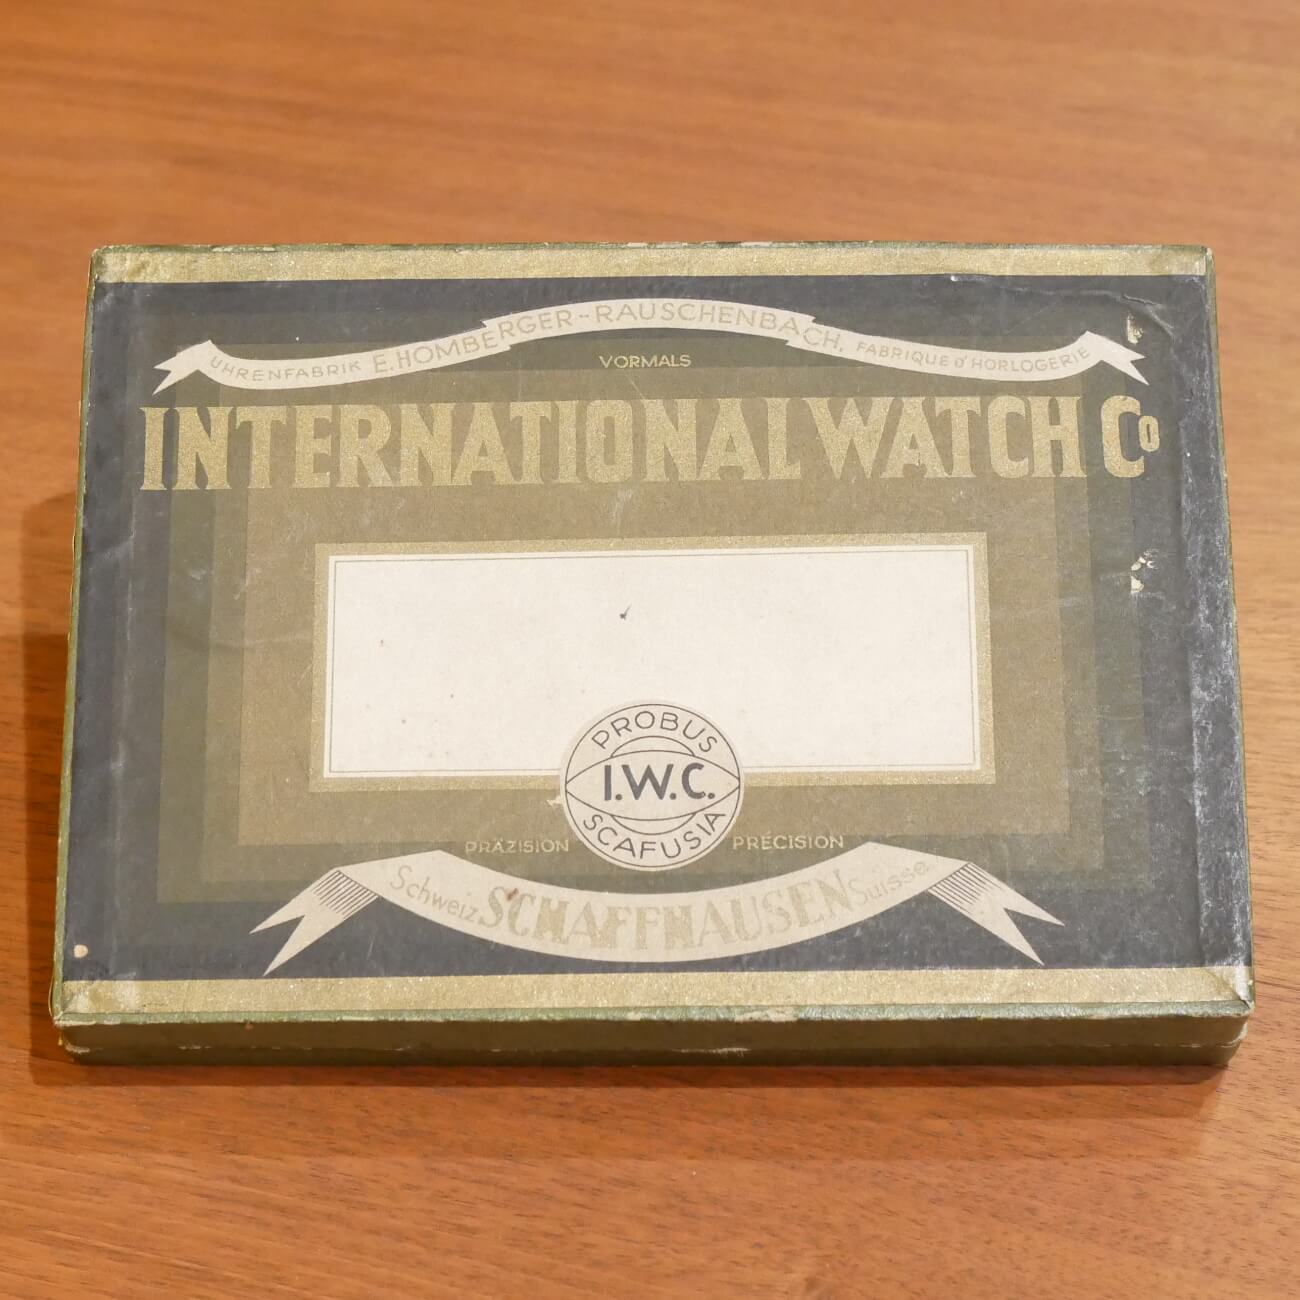 WATCH CASE & OTHER IWC PAPER BOX